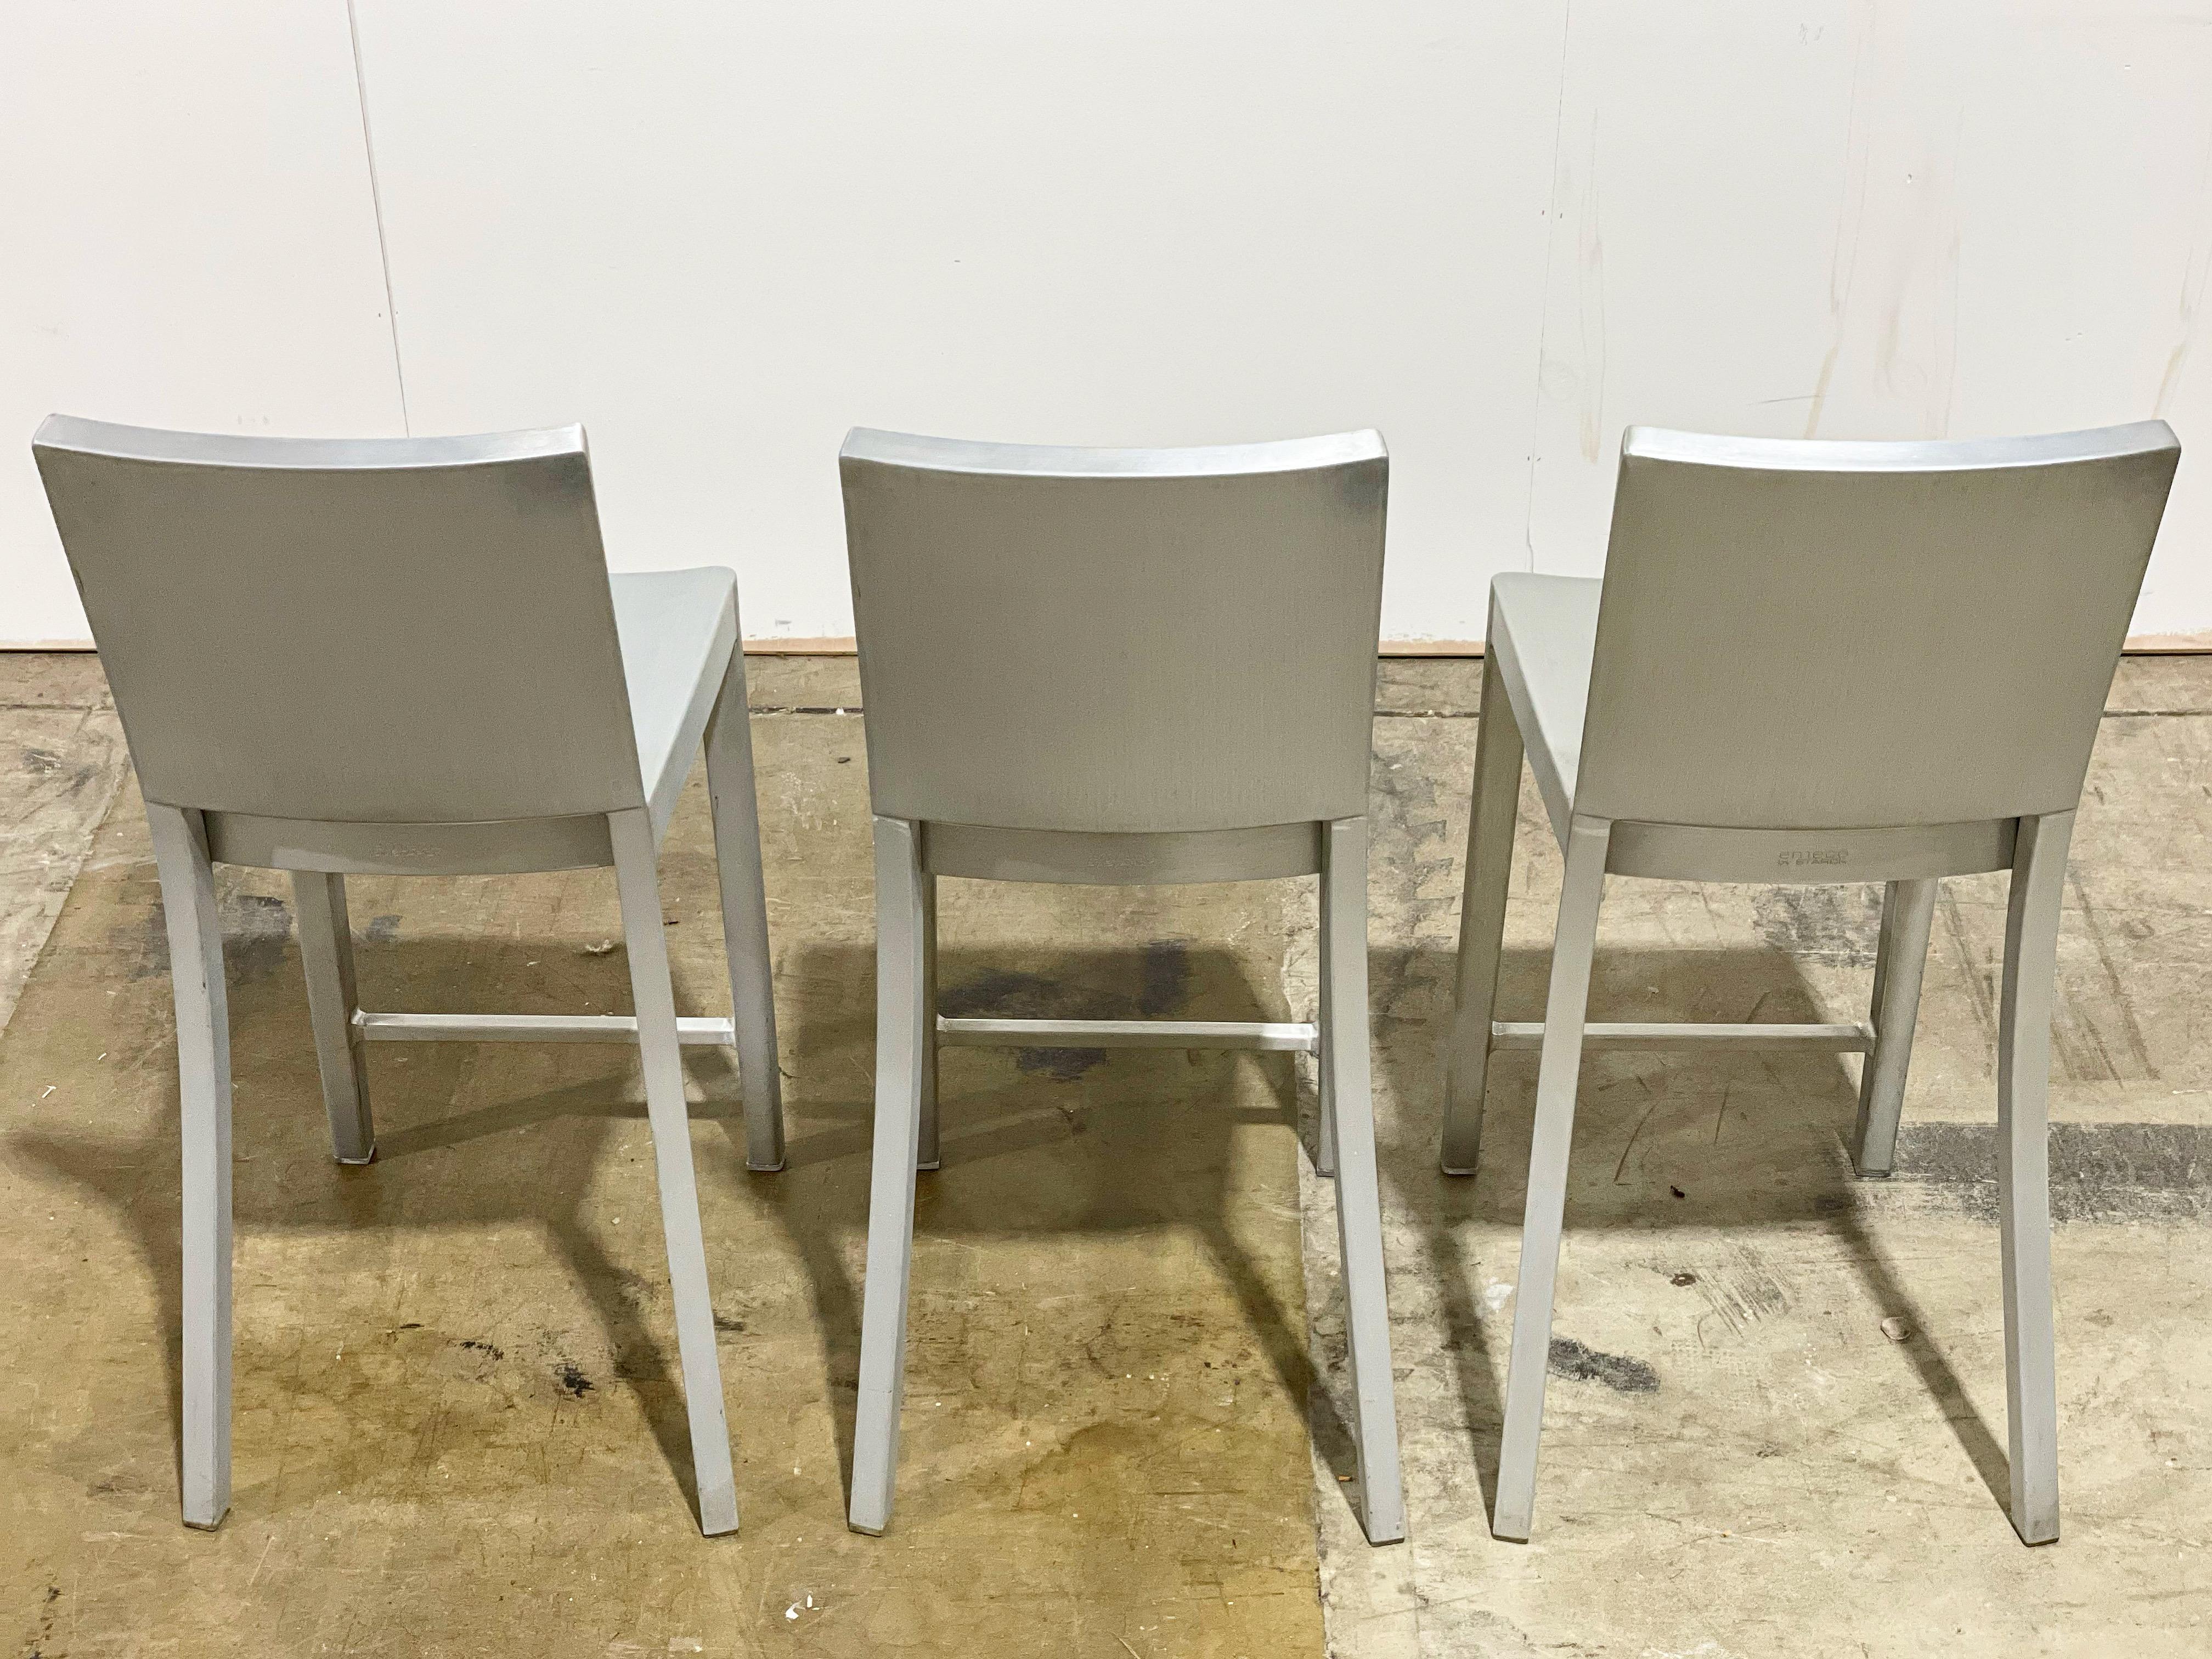 Contemporary Philippe Starck + Emeco Hudson Barstools in Brushed Aluminum, Counter Height